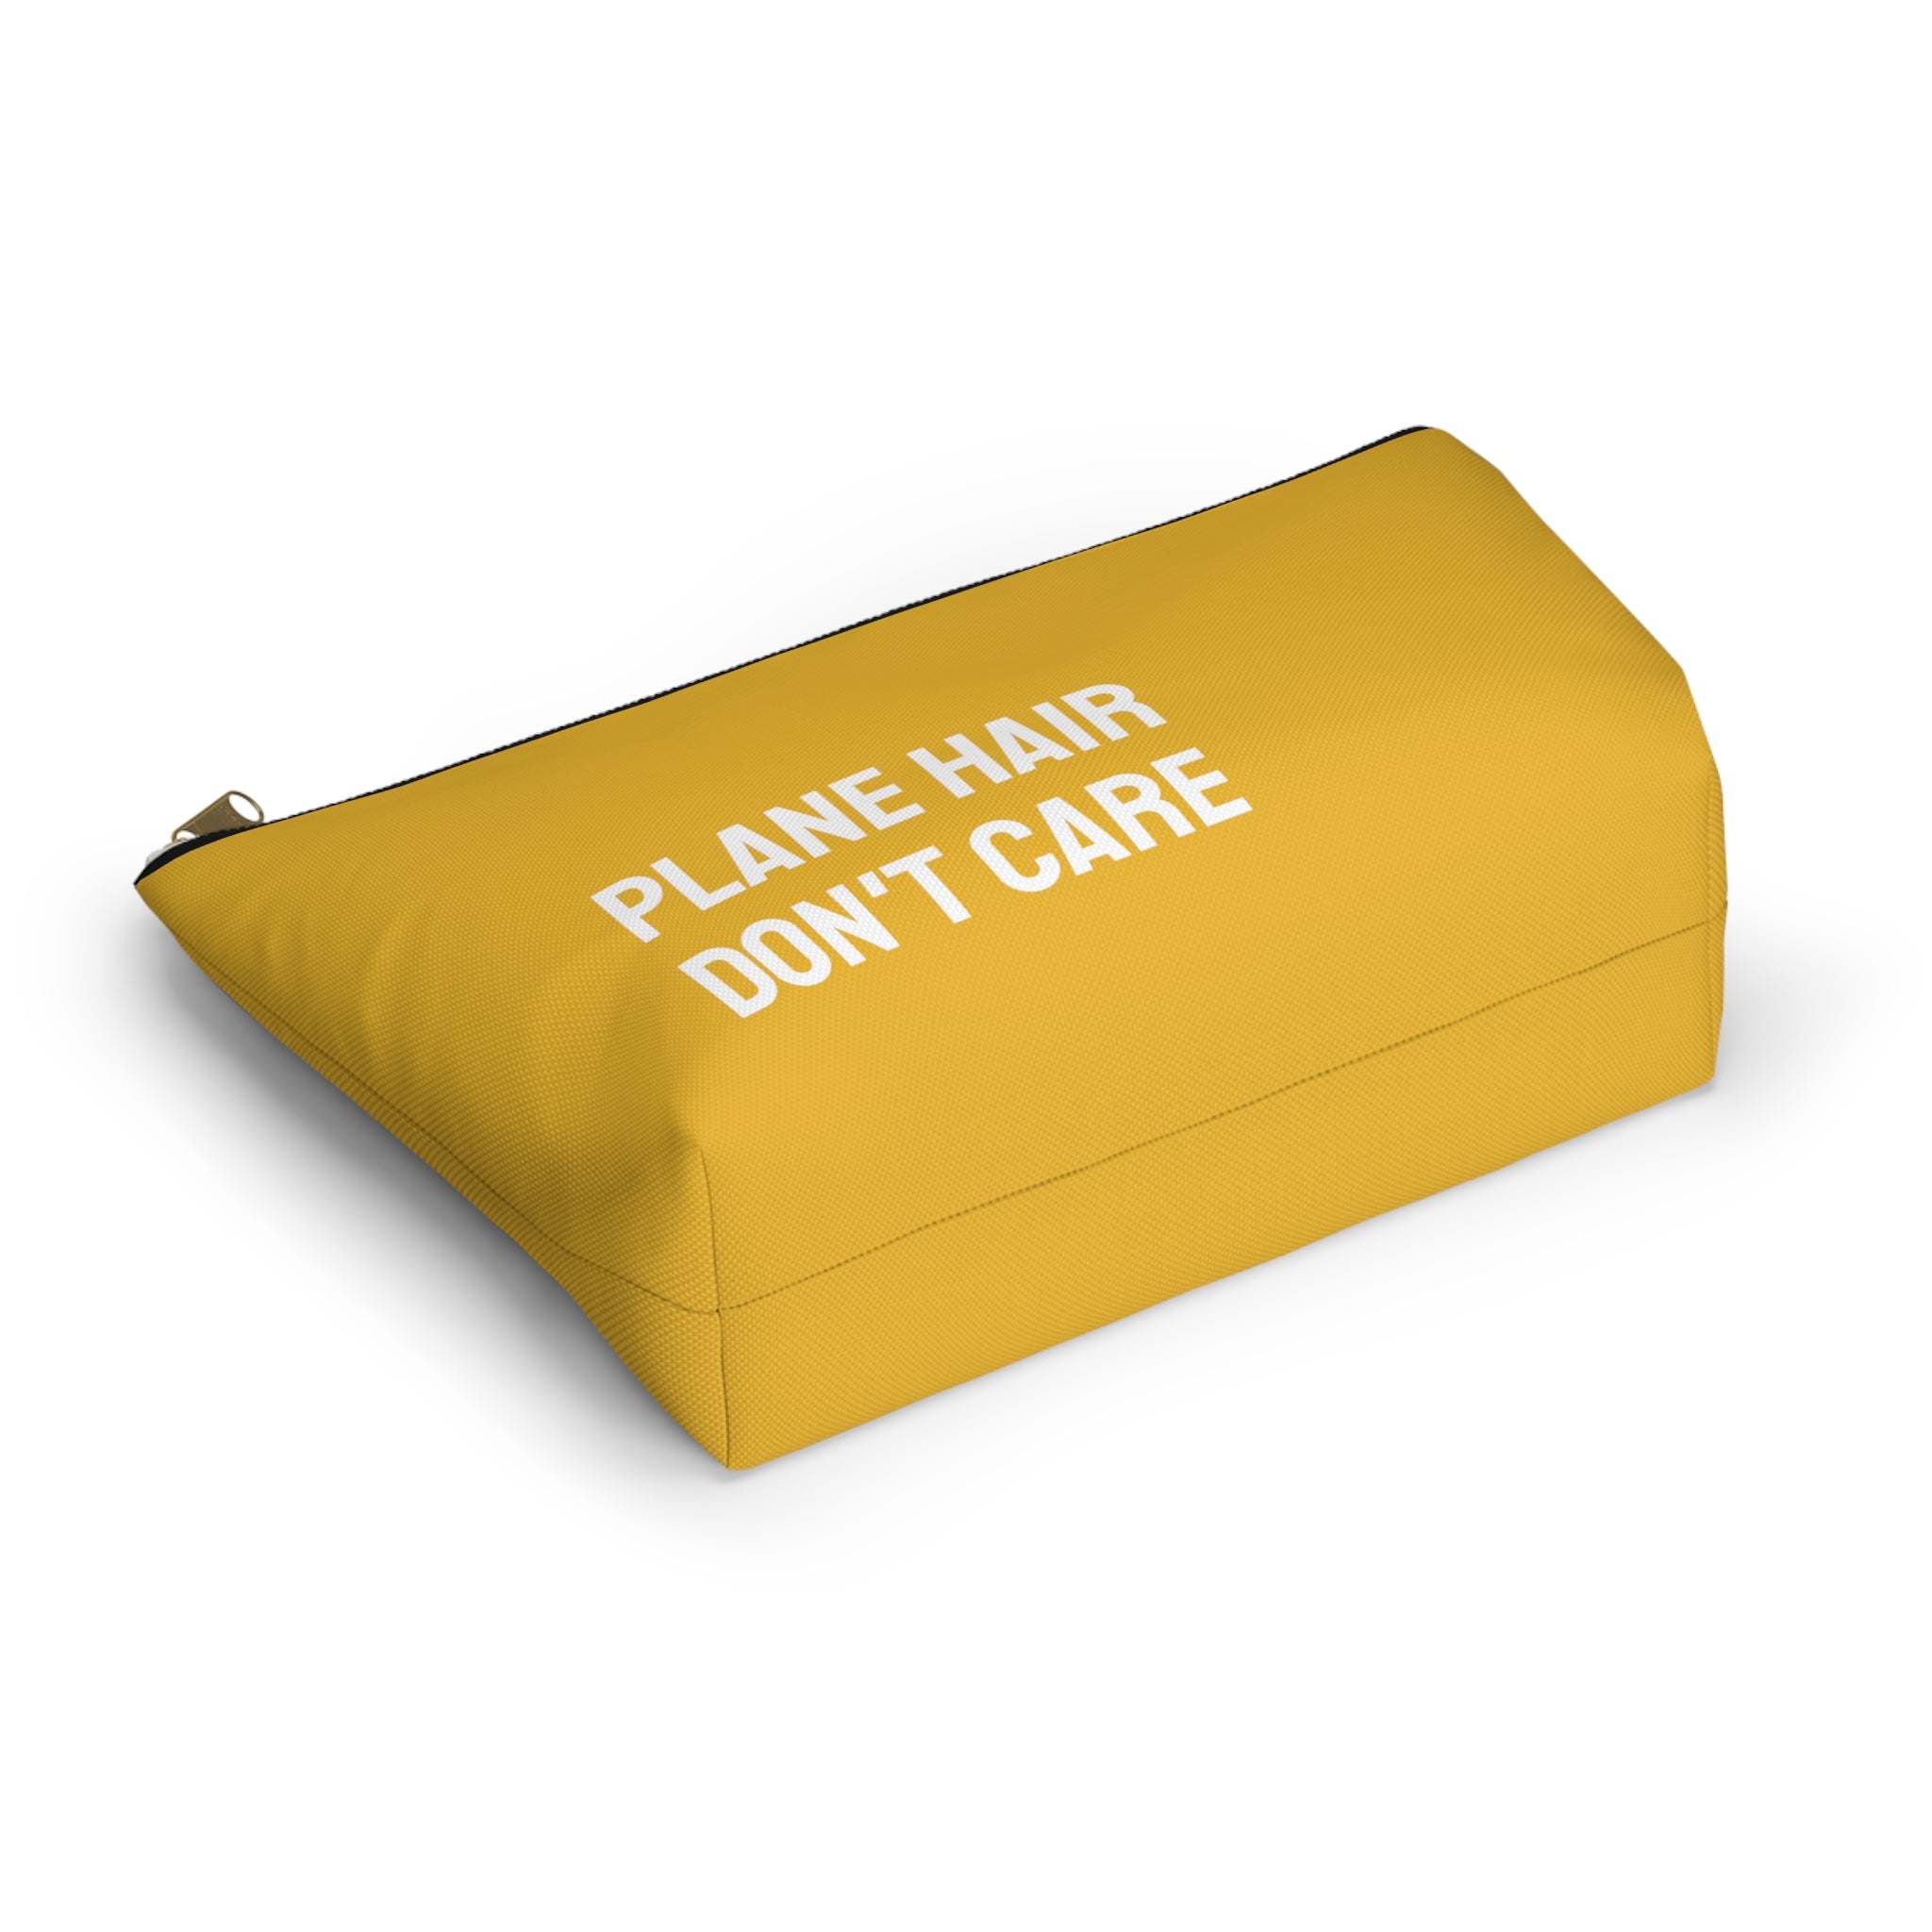 Plane hair don't care Pouch (Yellow)